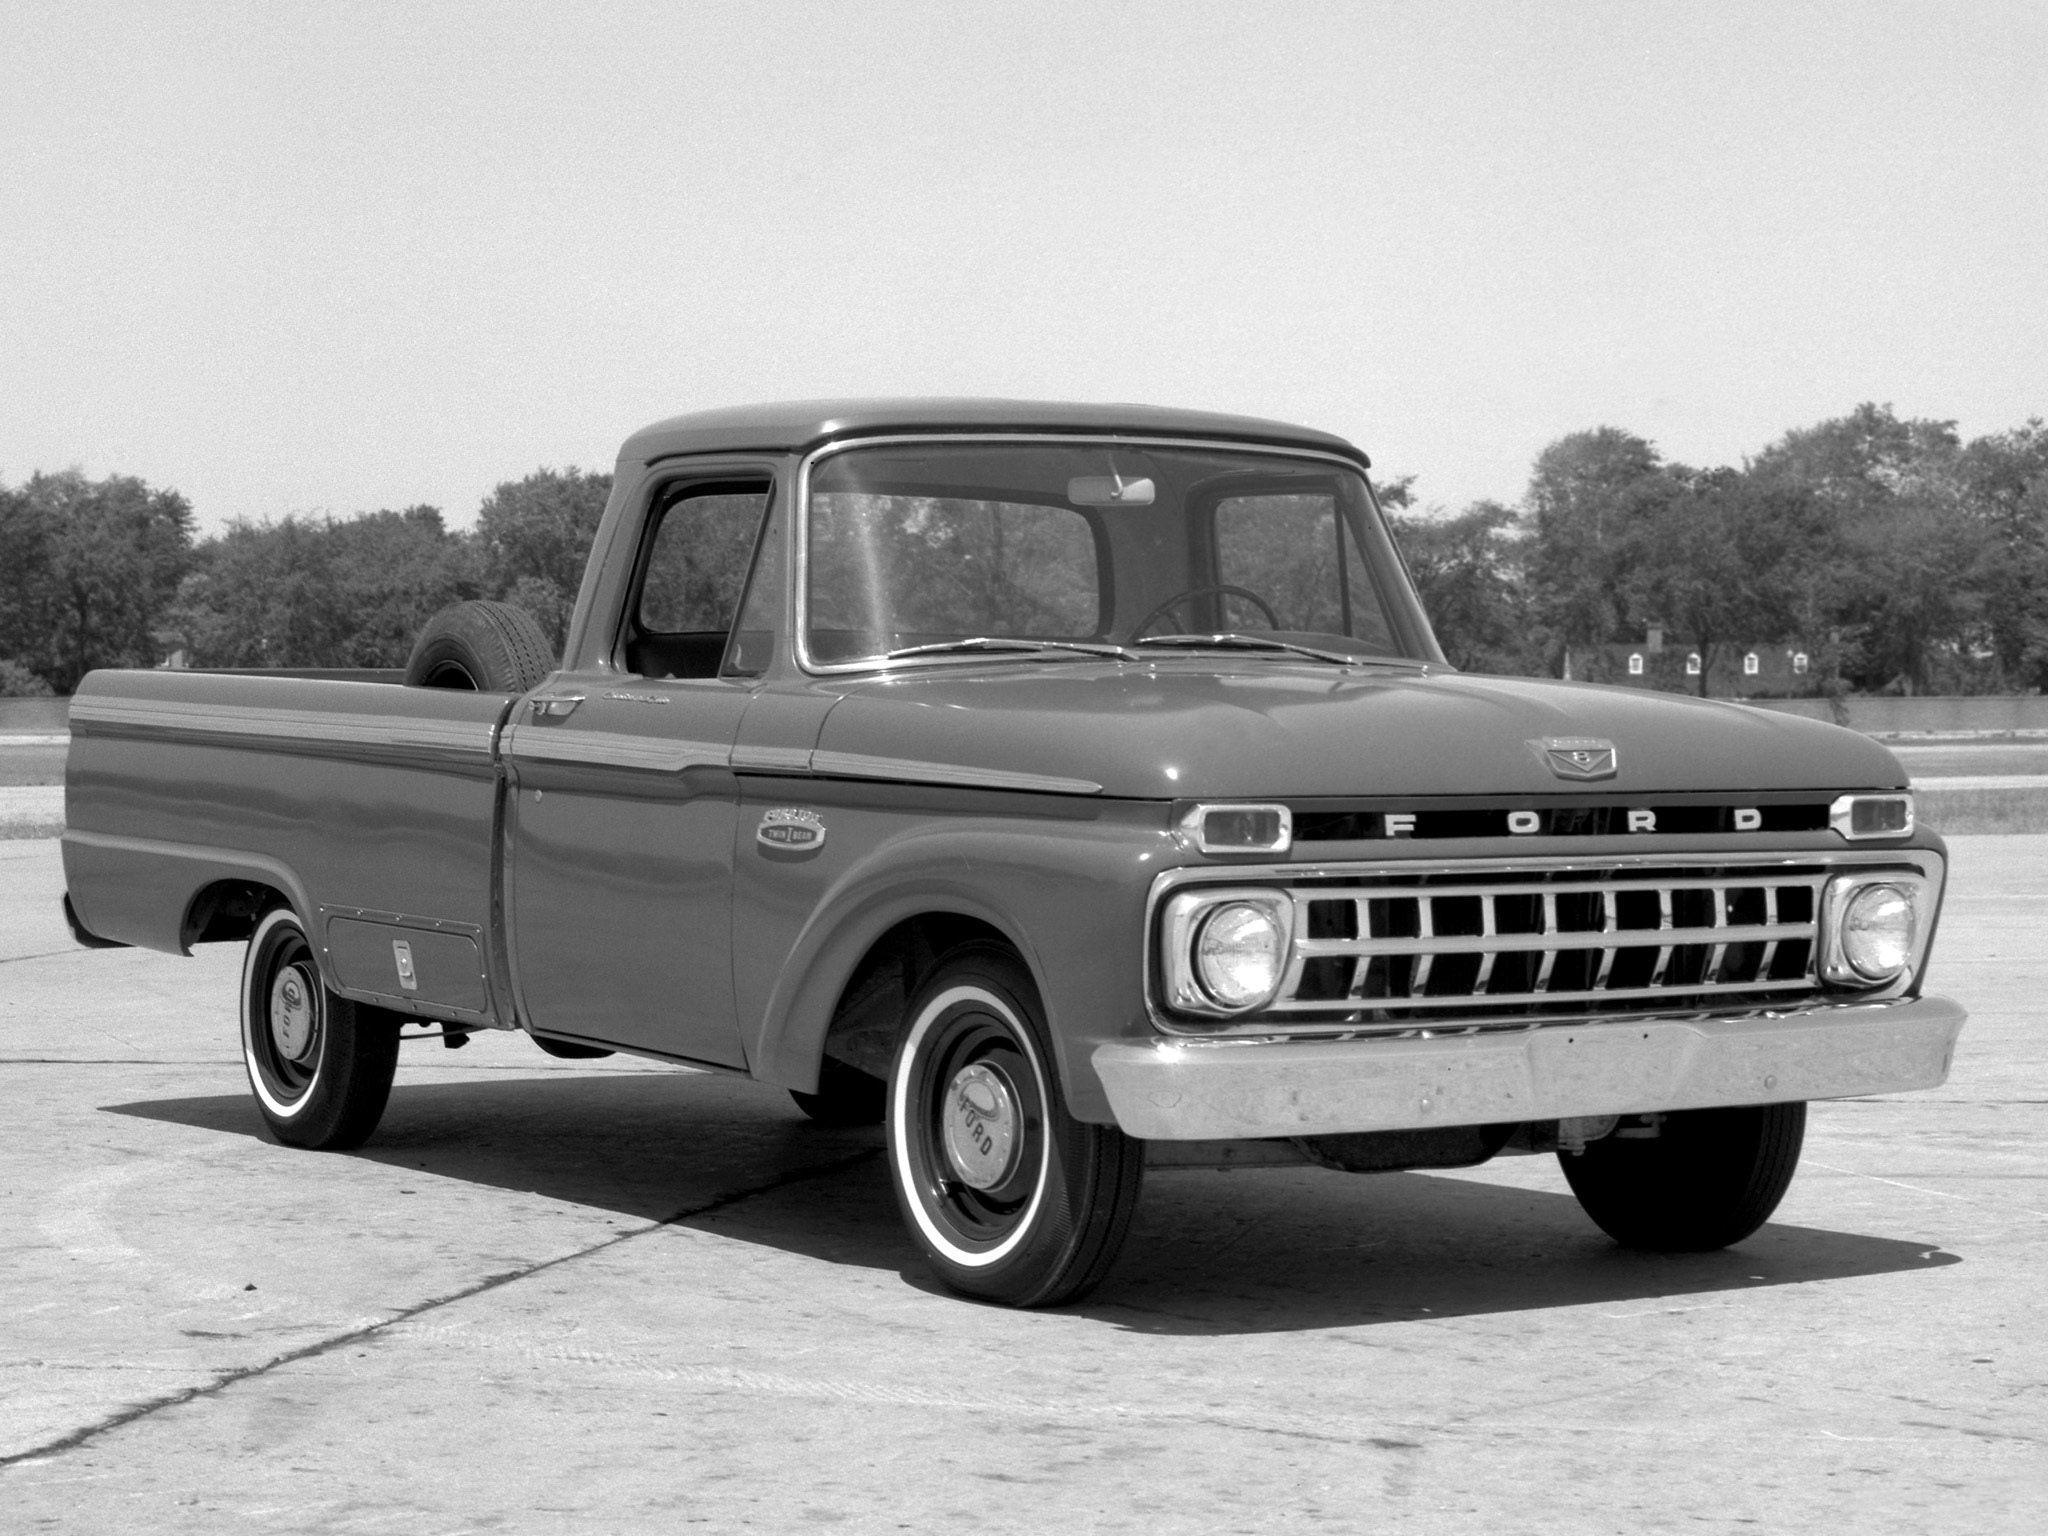 Old Ford Truck Wallpaper 55 images